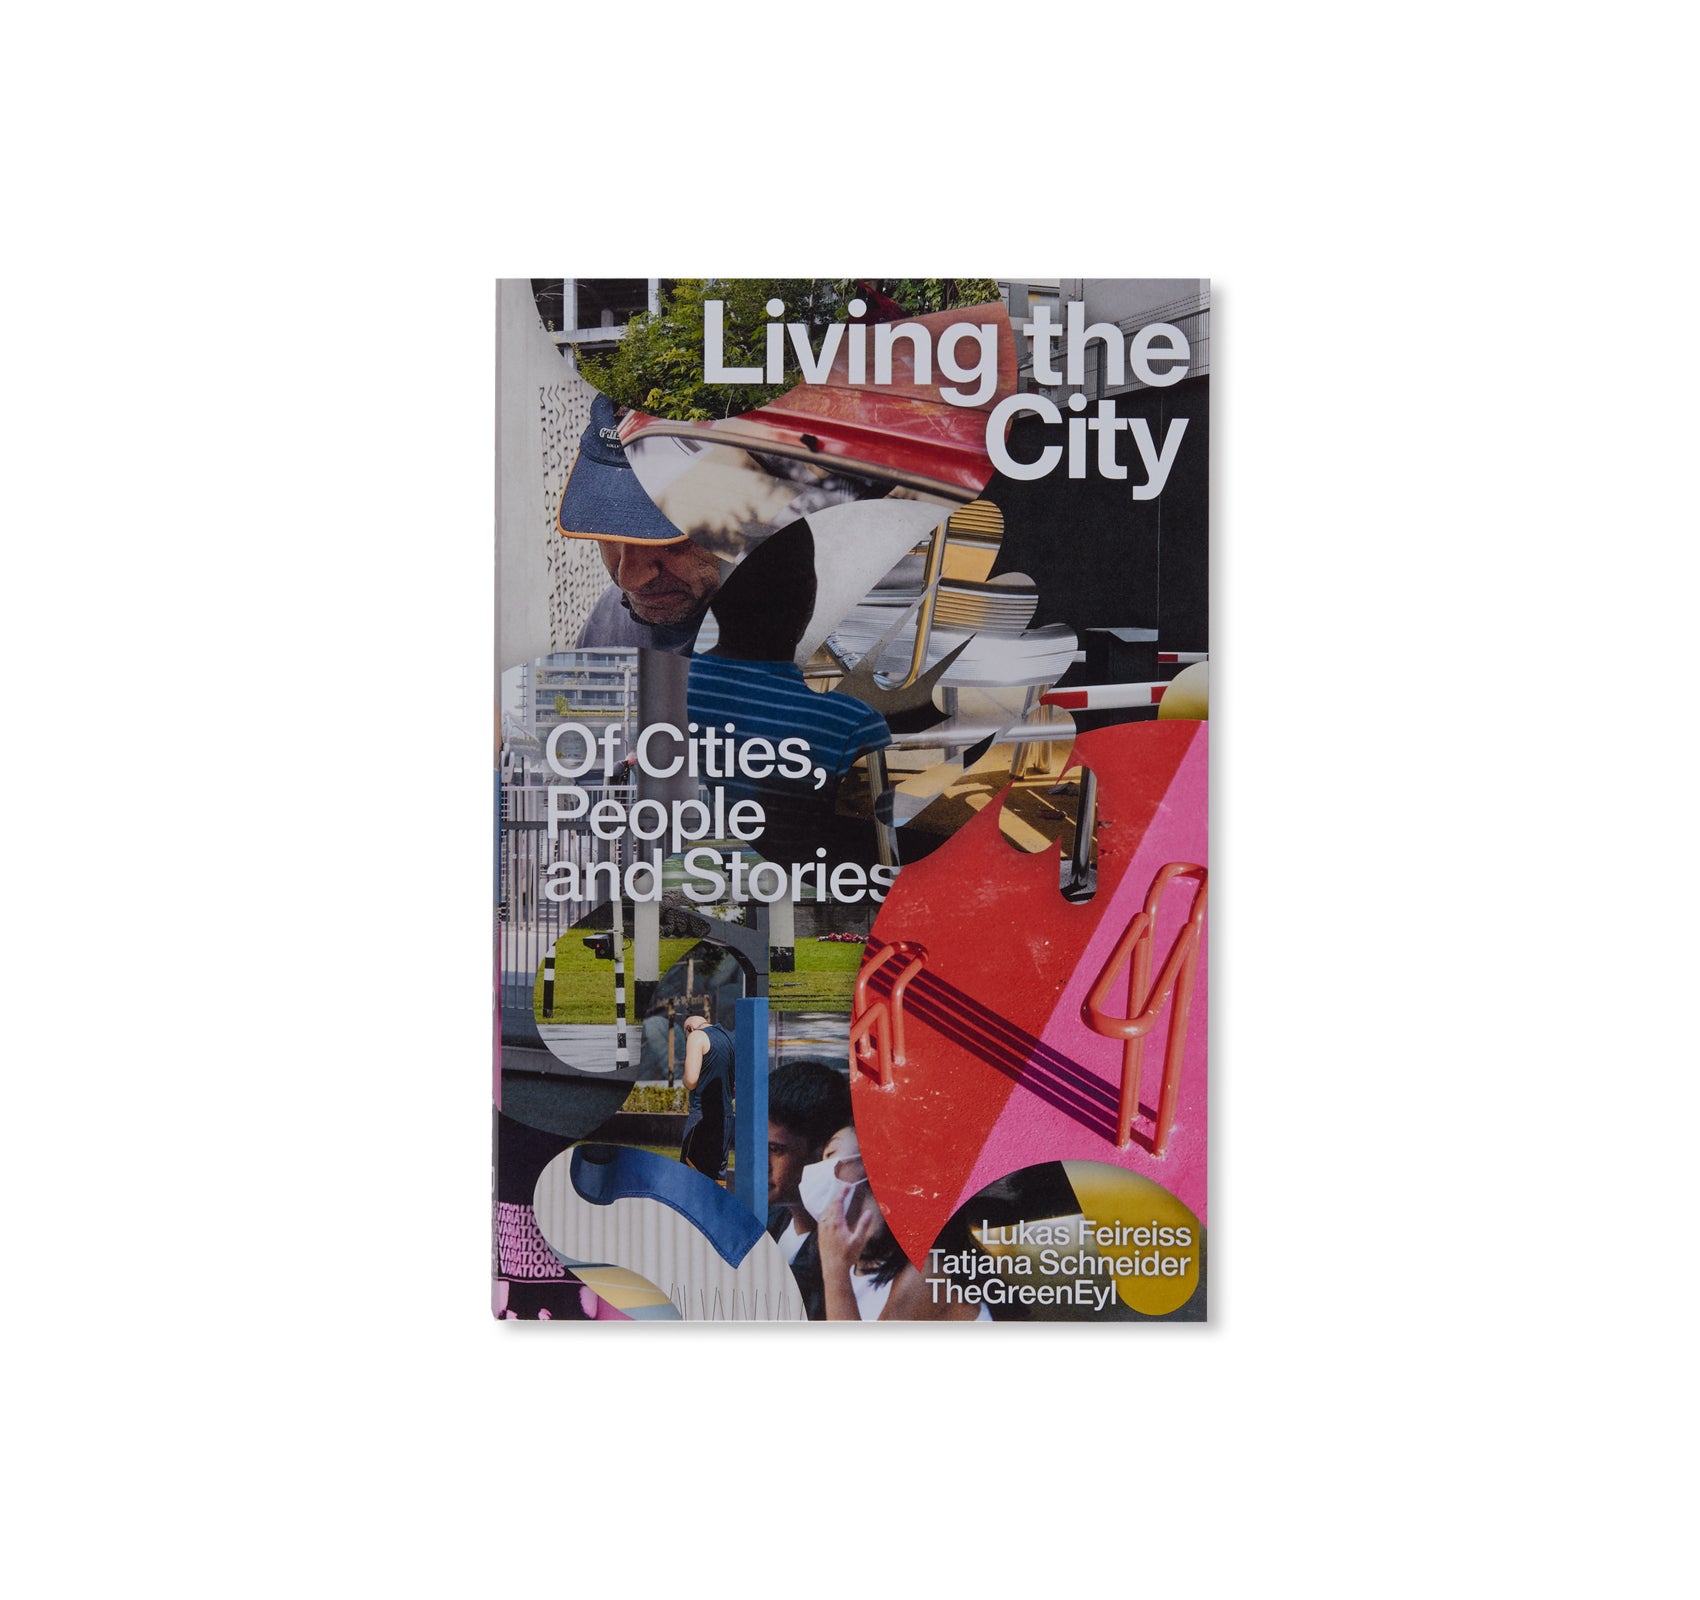 LIVING THE CITY OF CITIES, PEOPLE AND STORIES by Lukas Feireiss and Tatjana Schneider